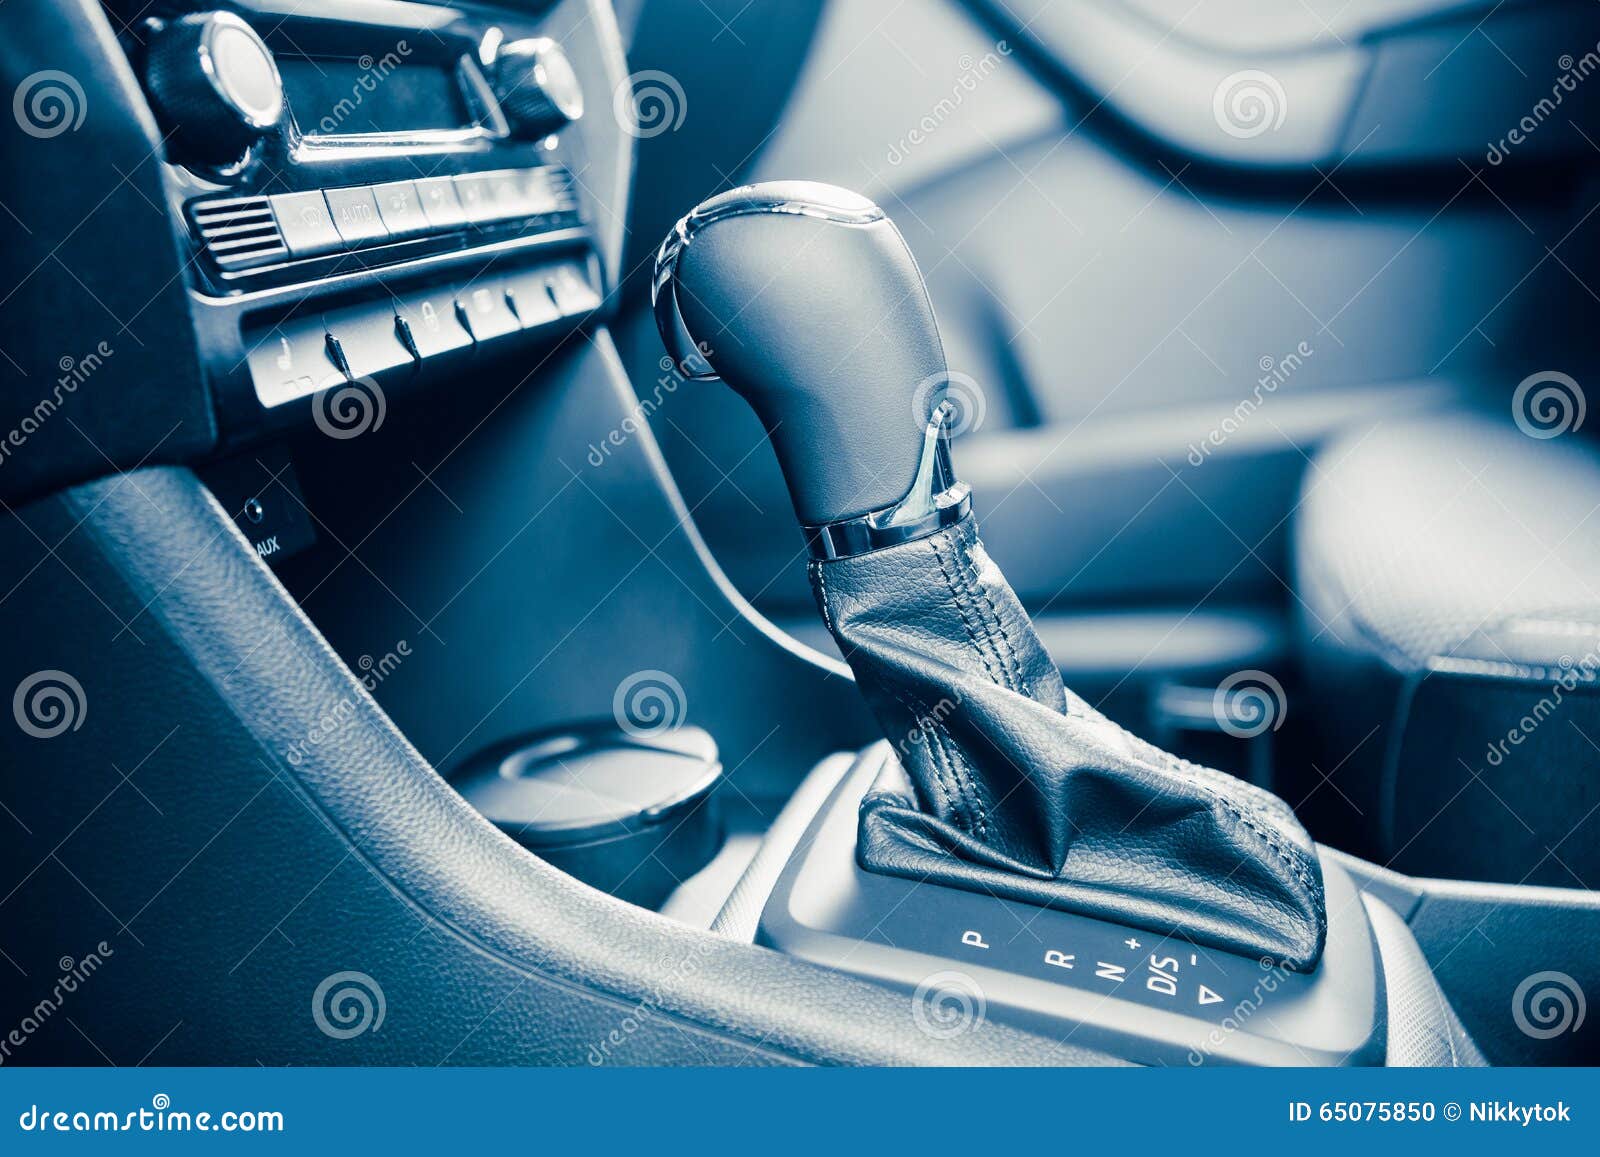 gearstick of speed shift selector in automatic transmission car